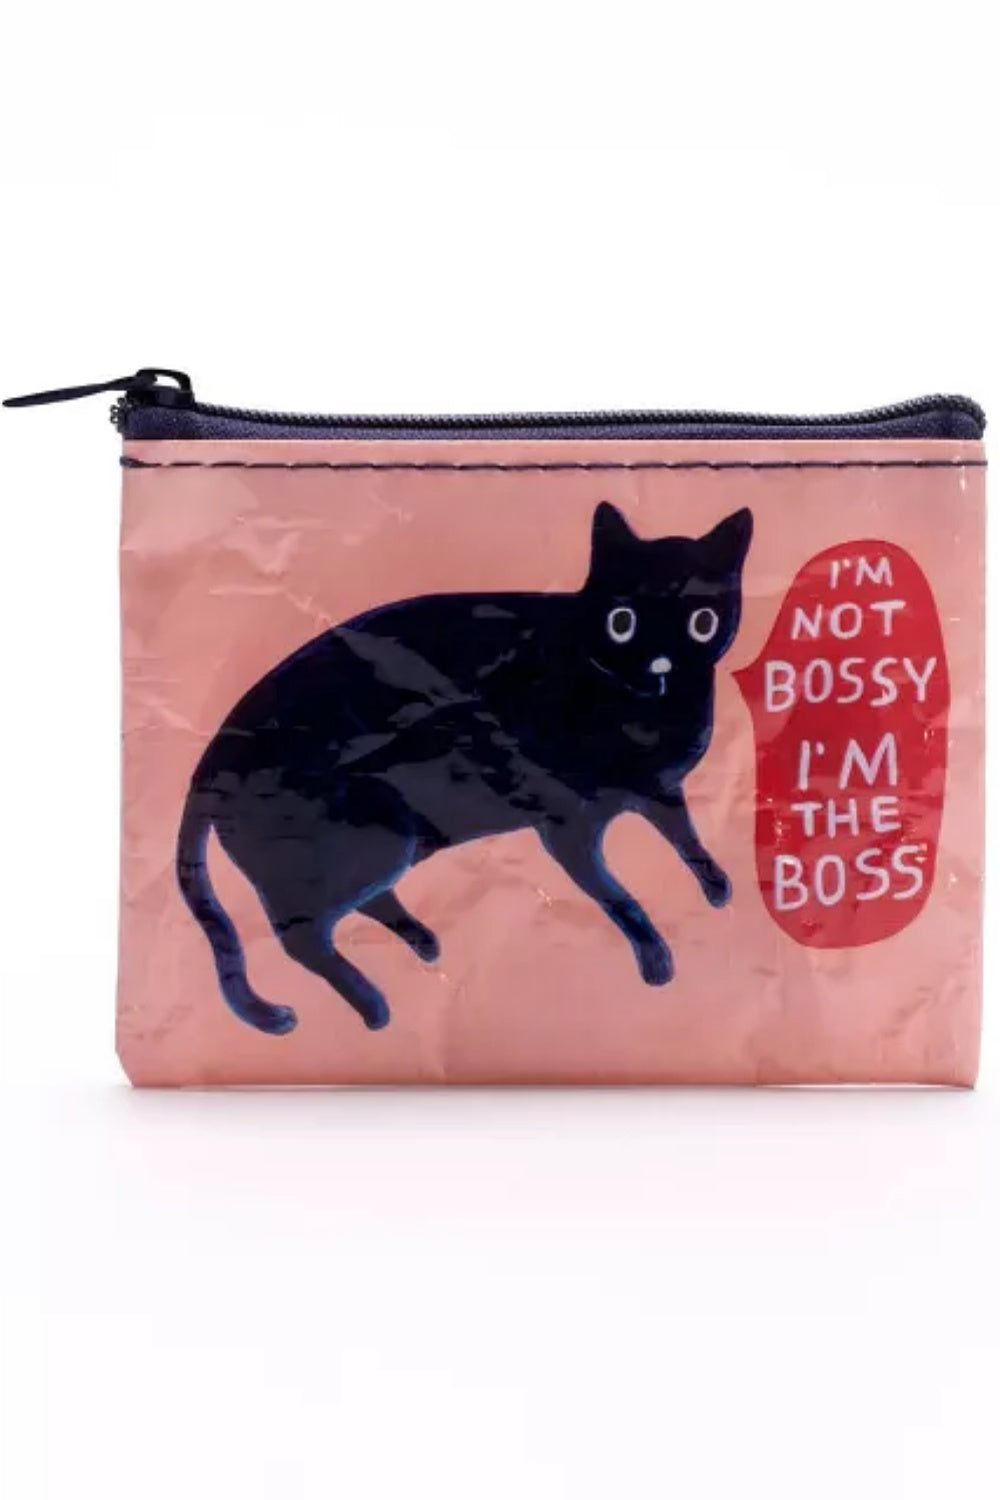 I'M NOT BOSSY, I'M THE BOSS COIN PURSE